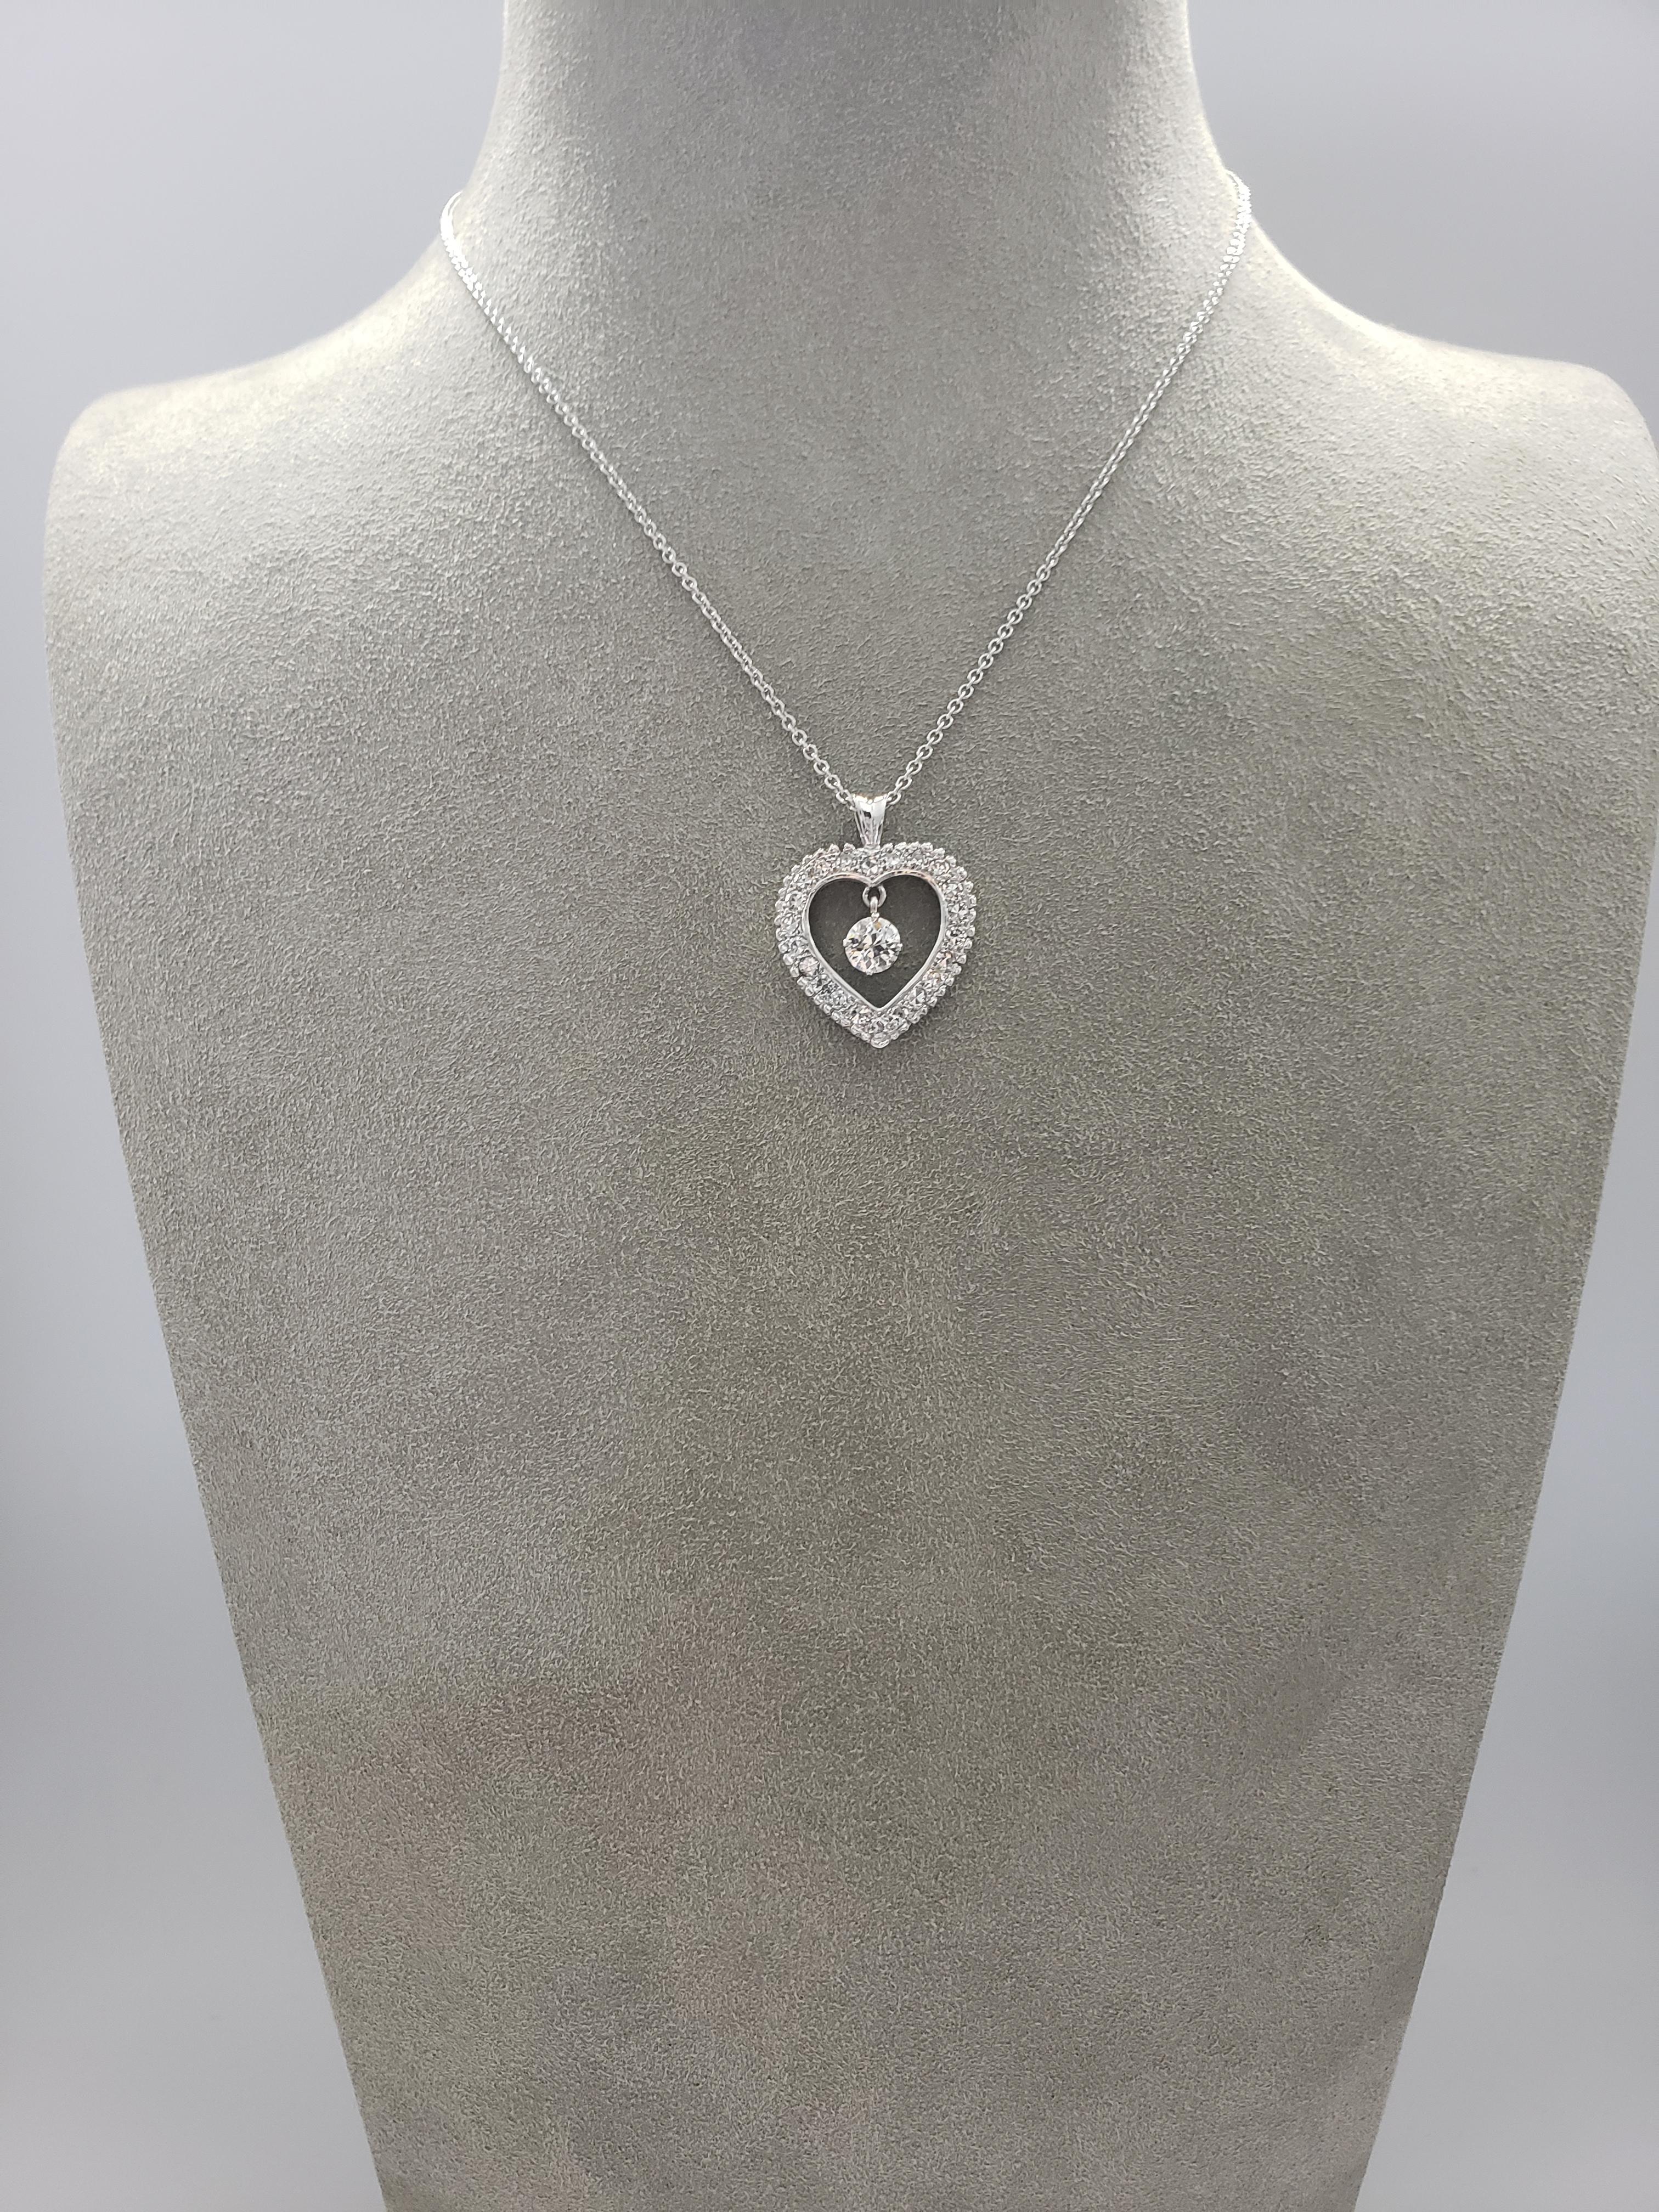 Roman Malakov 1.81 Old Mine and French Cut Diamonds Heart Shape Pendant Necklace In New Condition For Sale In New York, NY